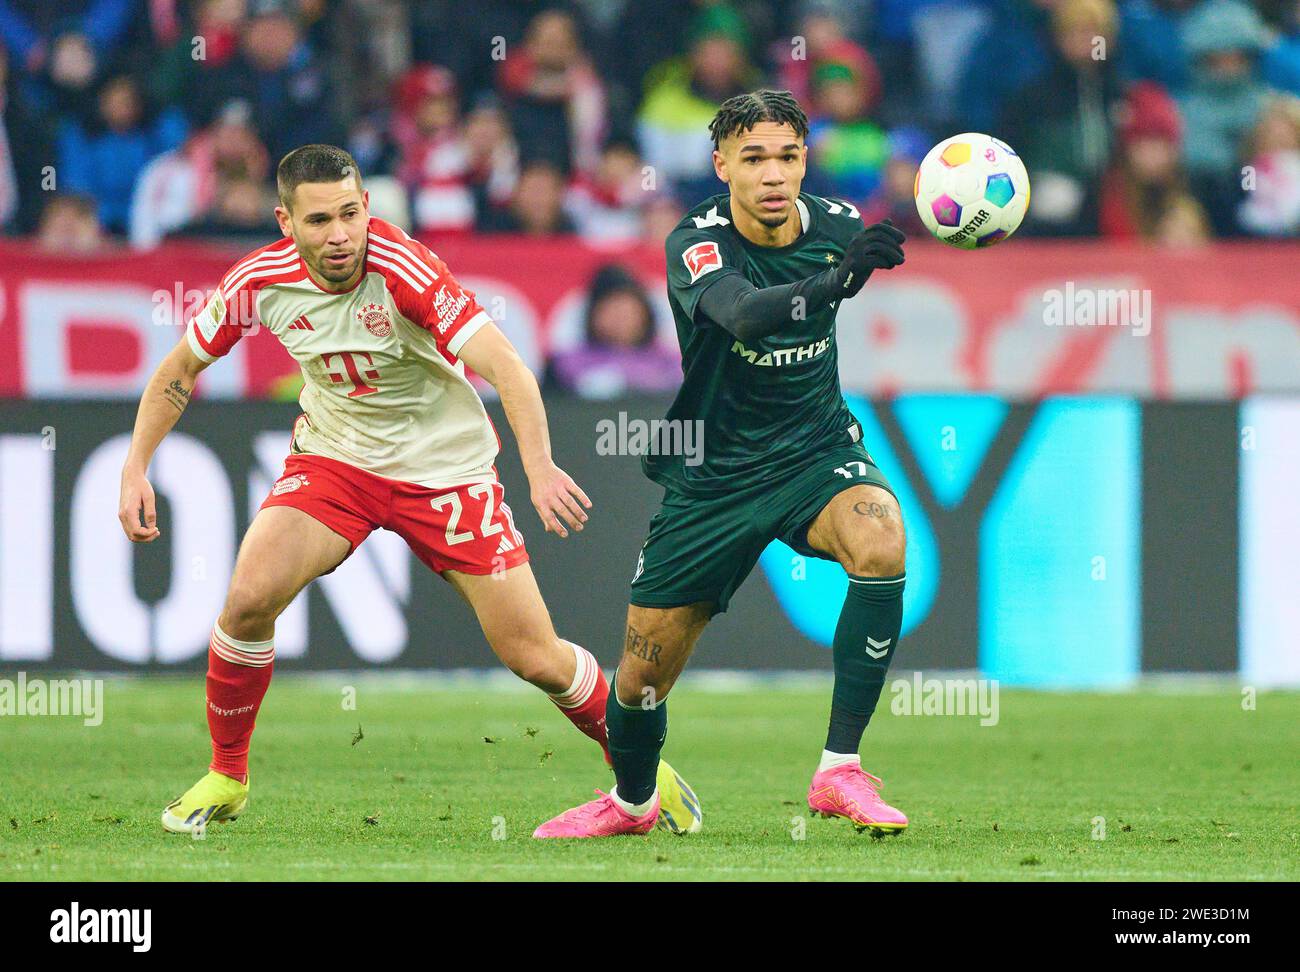 Raphael Guerreiro, FCB 22  compete for the ball, tackling, duel, header, zweikampf, action, fight against Justin Njinmah, BRE 16   in the match  FC BAYERN MUENCHEN - WERDER BREMEN 0-1   on Jan 21, 2024 in Munich, Germany. Season 2023/2024, 1.Bundesliga, FCB, München, matchday 18, 18.Spieltag © Peter Schatz / Alamy Live News    - DFL REGULATIONS PROHIBIT ANY USE OF PHOTOGRAPHS as IMAGE SEQUENCES and/or QUASI-VIDEO - Stock Photo